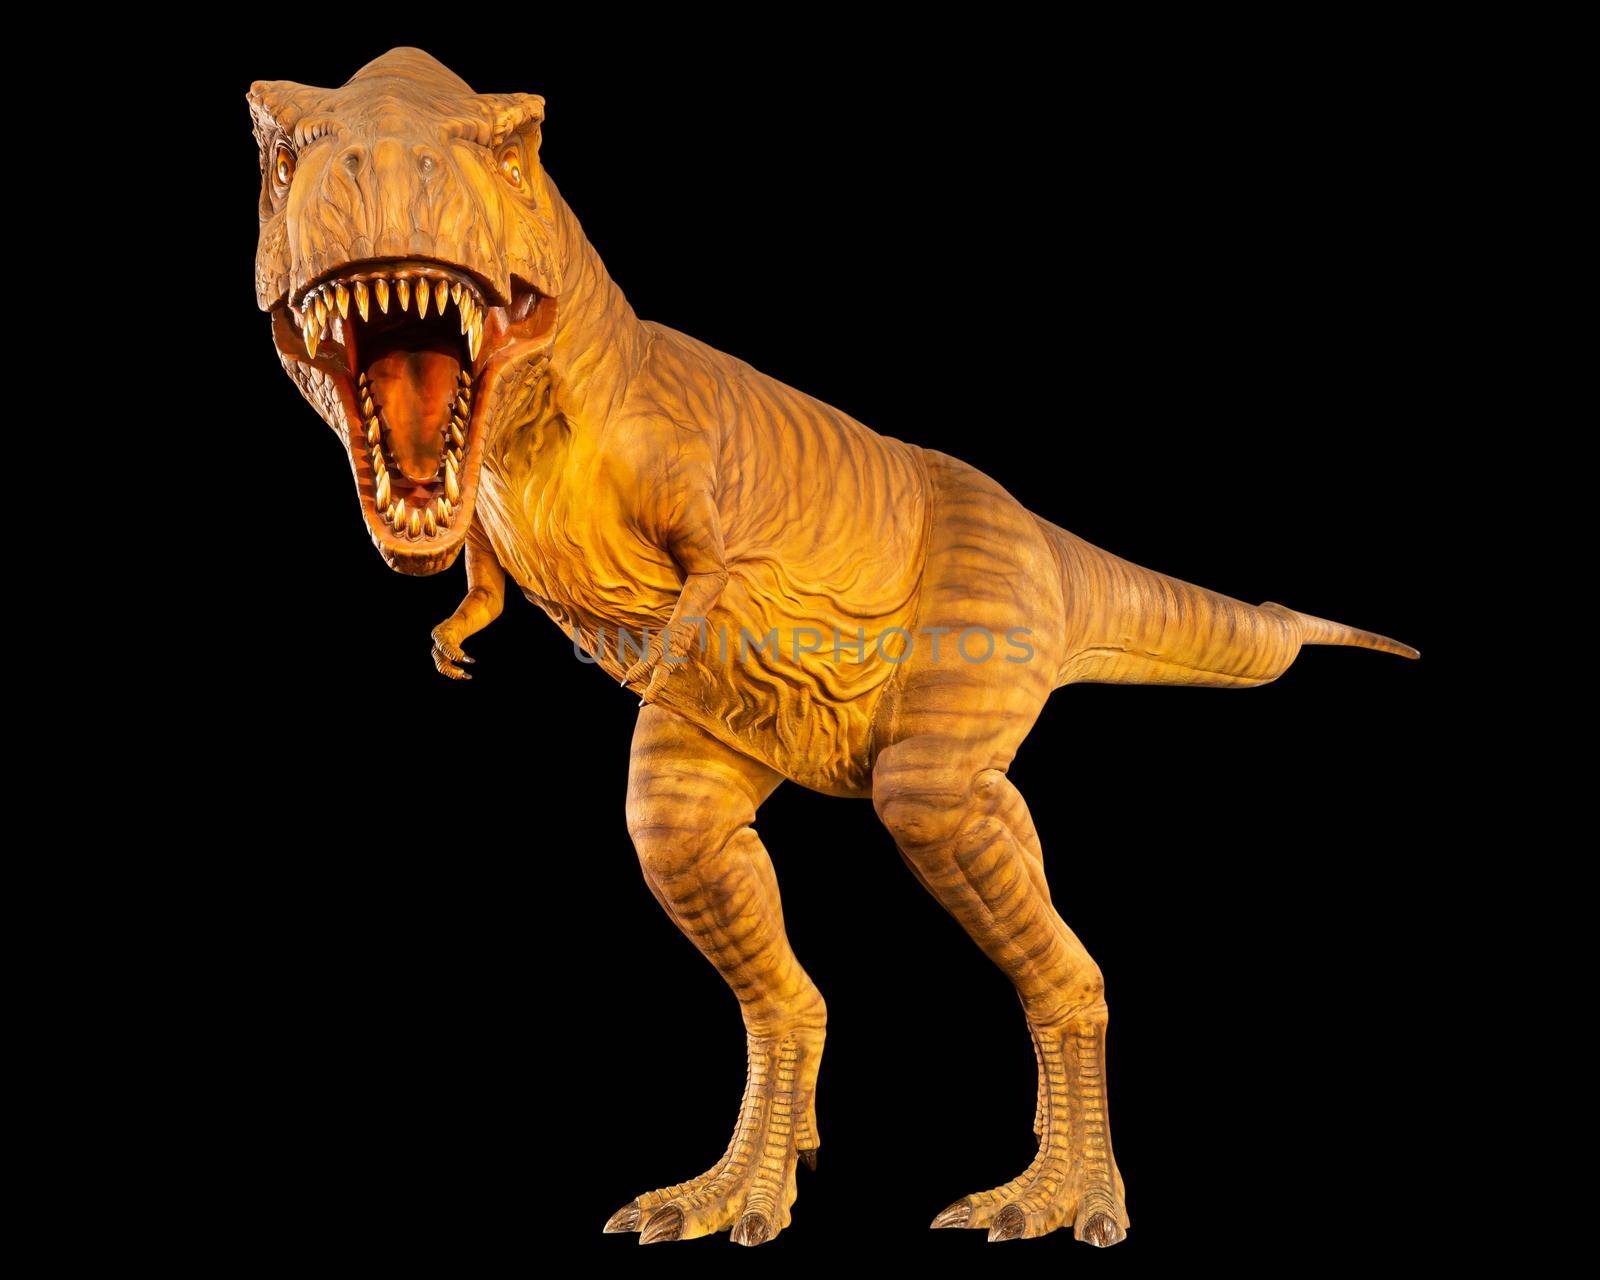 Tyrannosaurus rex ( T-rex ) is walking and open mouth . Front view . Black isolated background . Dinosaur in jurassic peroid . Embedded clipping paths . by stockdevil